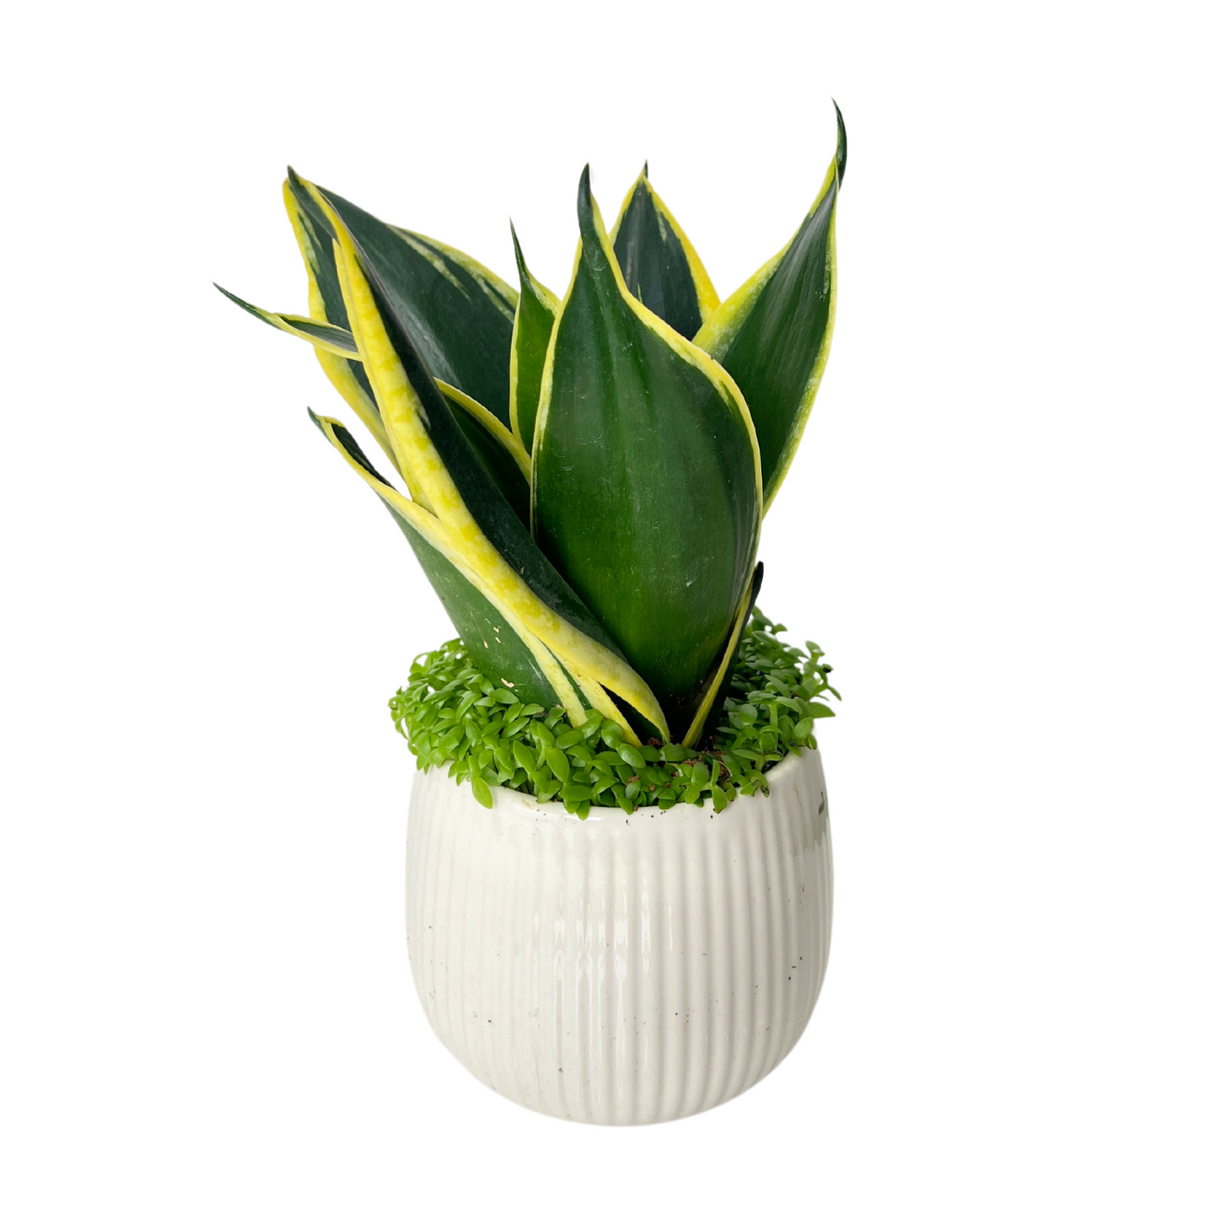 Sansevieria Plant with Dragon Fruit Seed